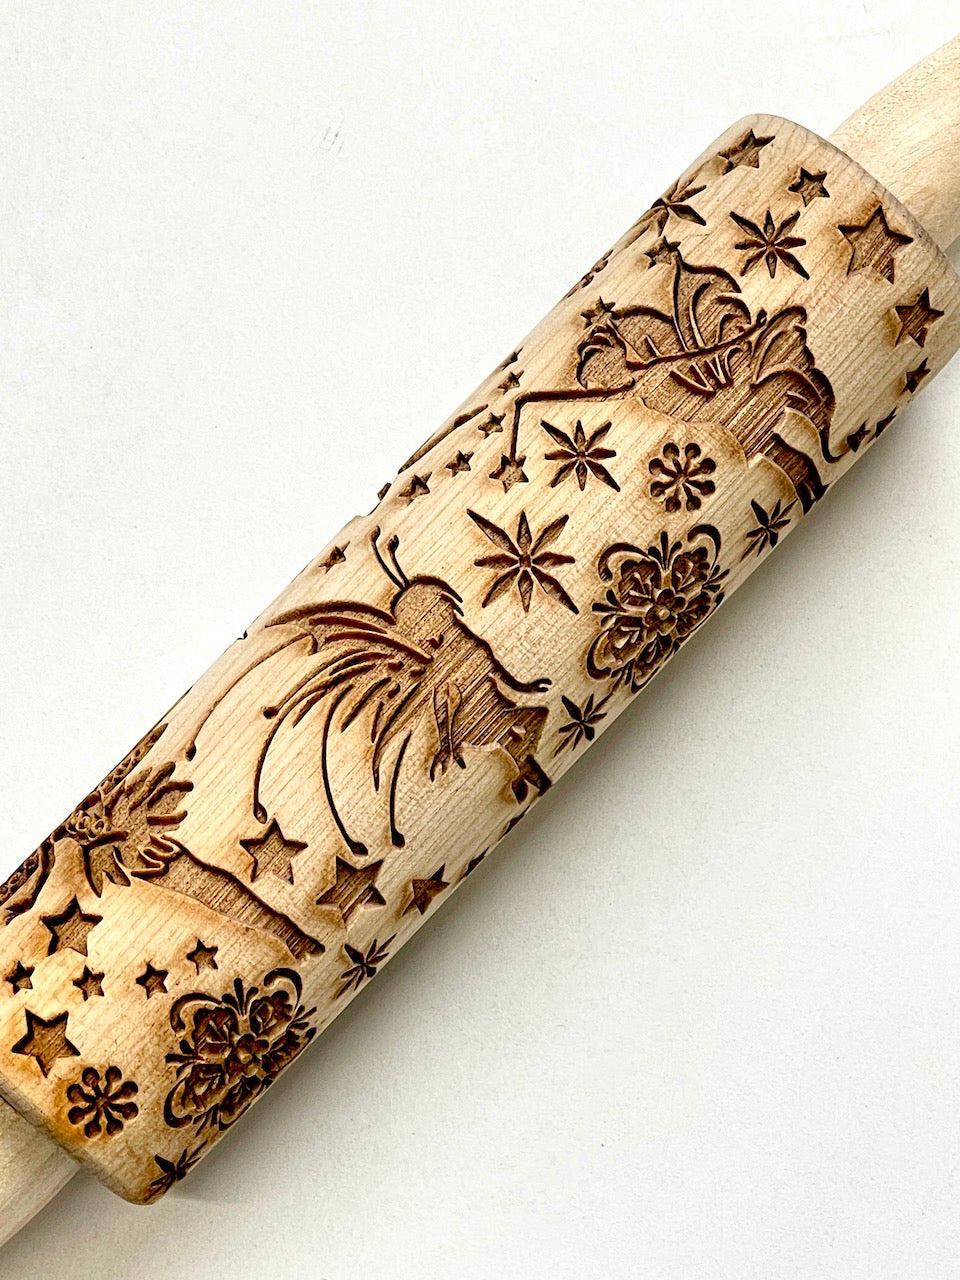 7" Fairy Textured Rolling Pin